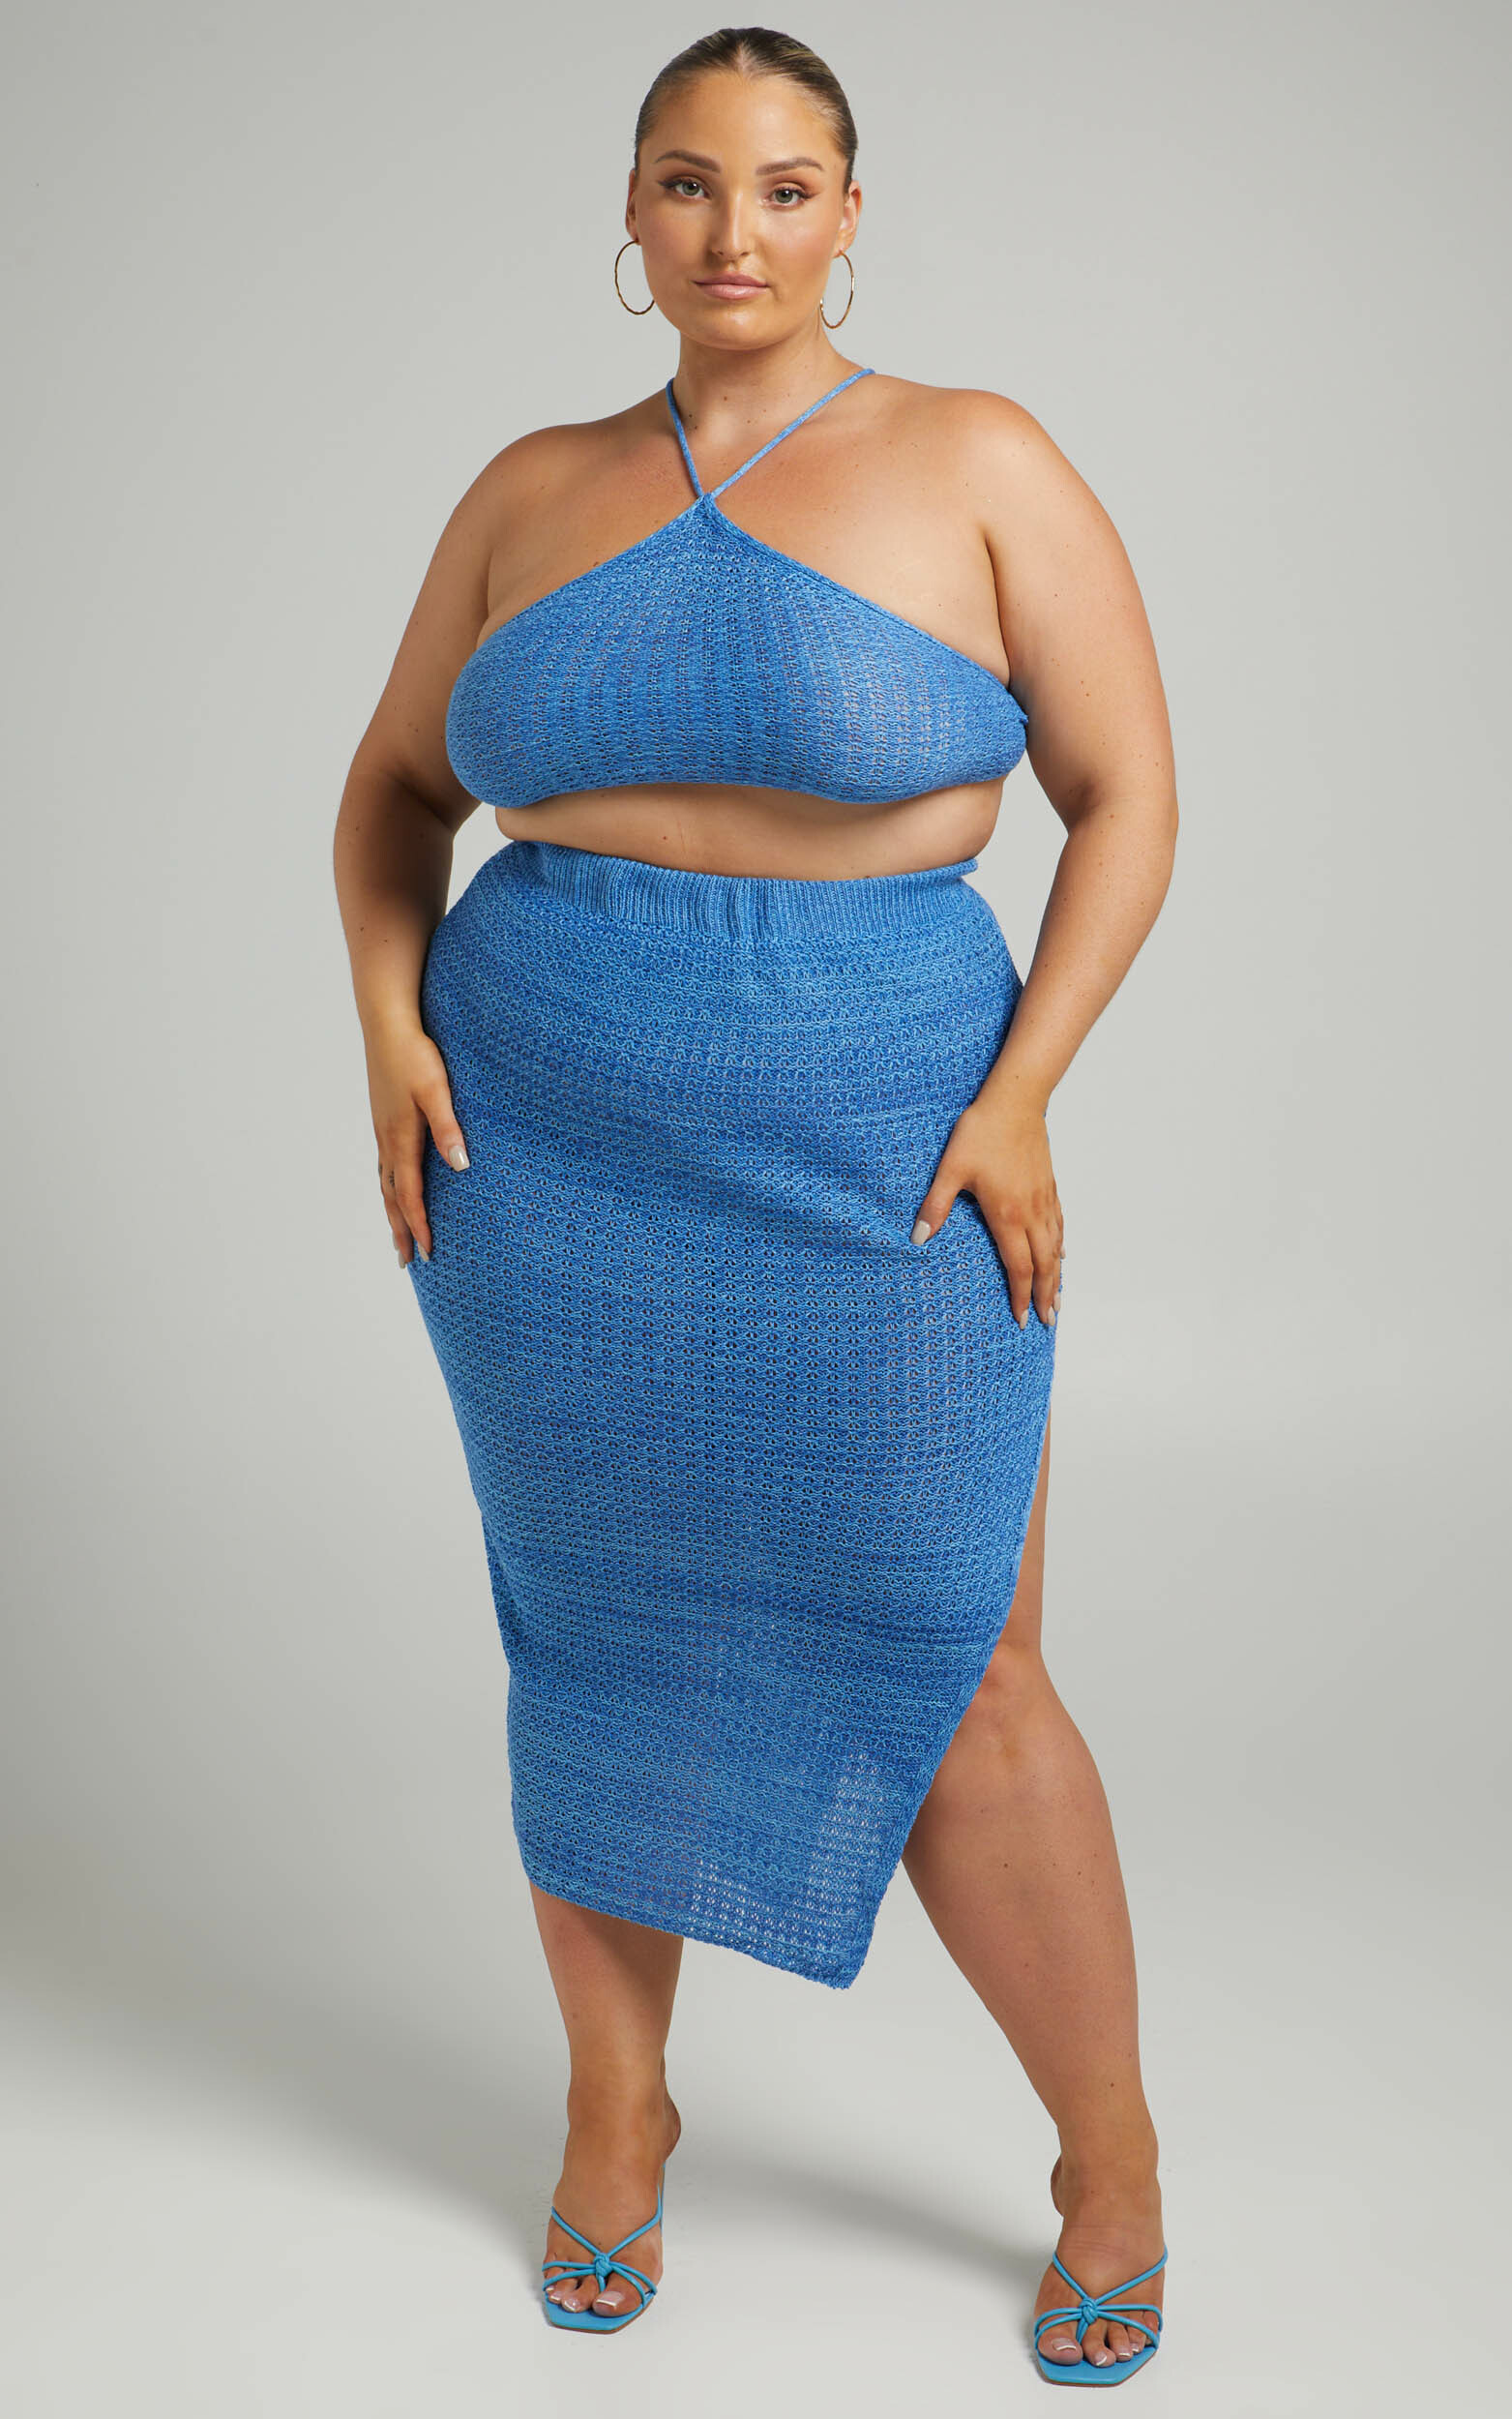 Missy Chevron Crochet Midi Skirt Two Piece Set in Blue - 04, BLU1, hi-res image number null